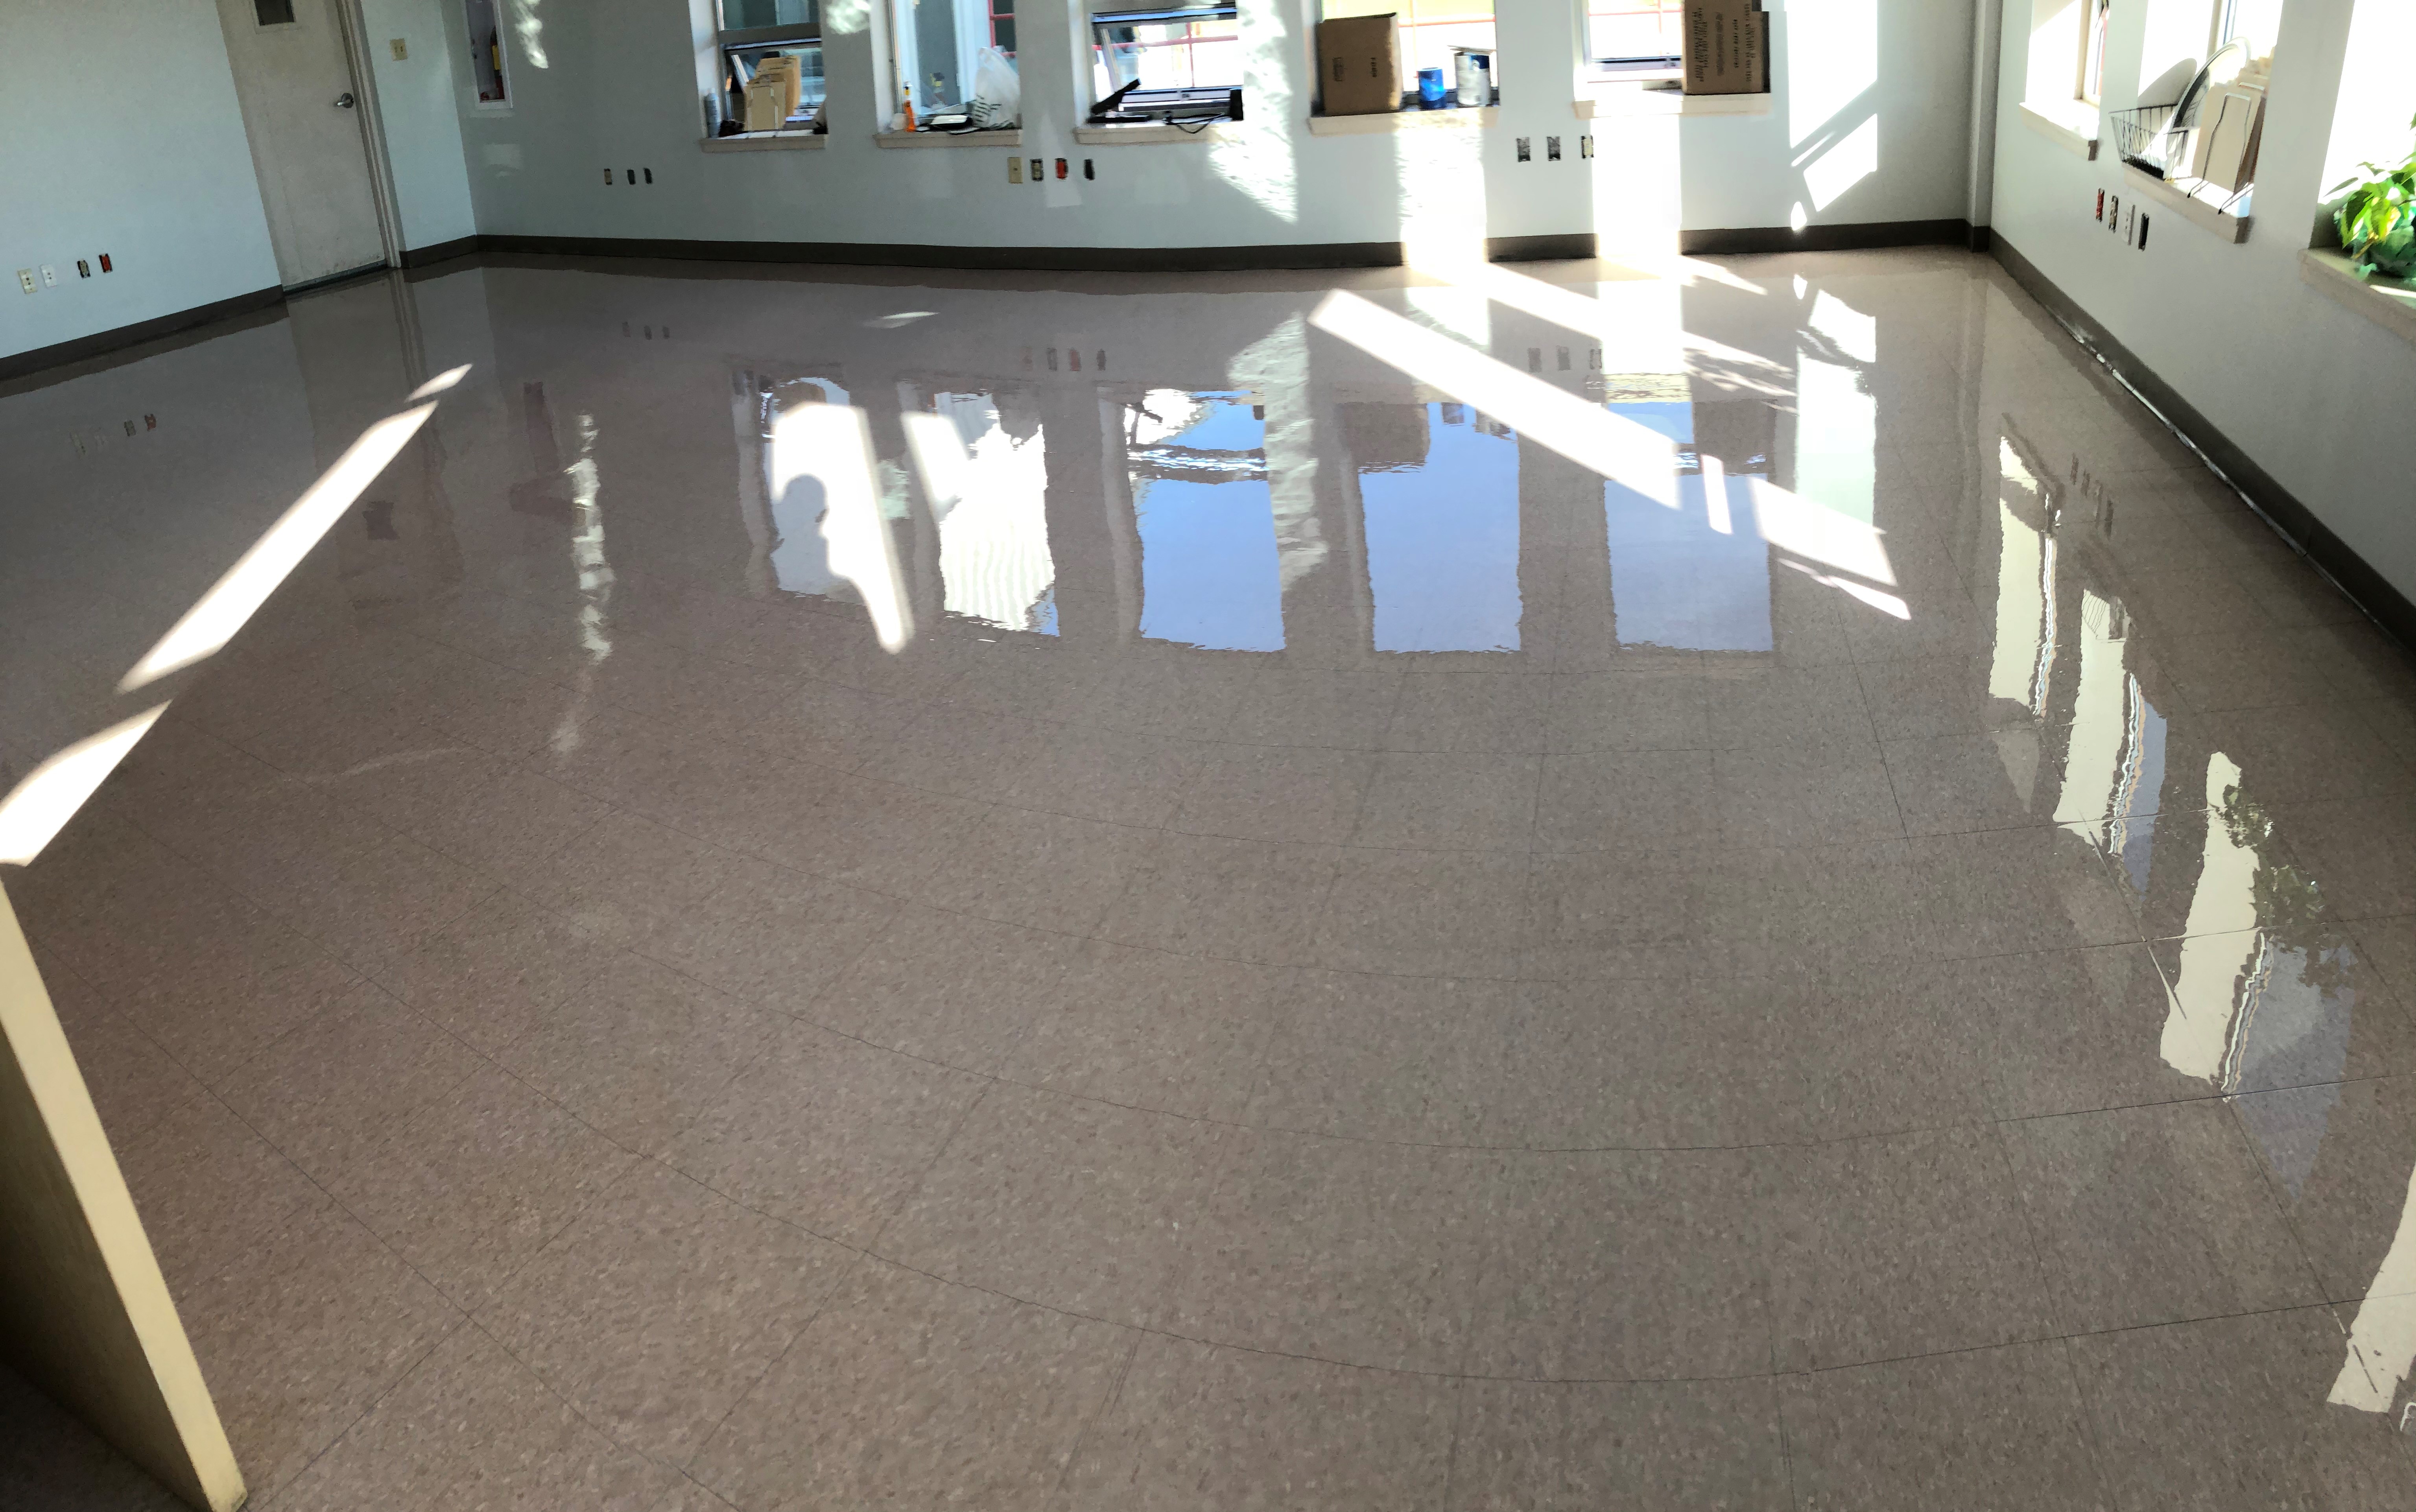 VCT floors after refinish